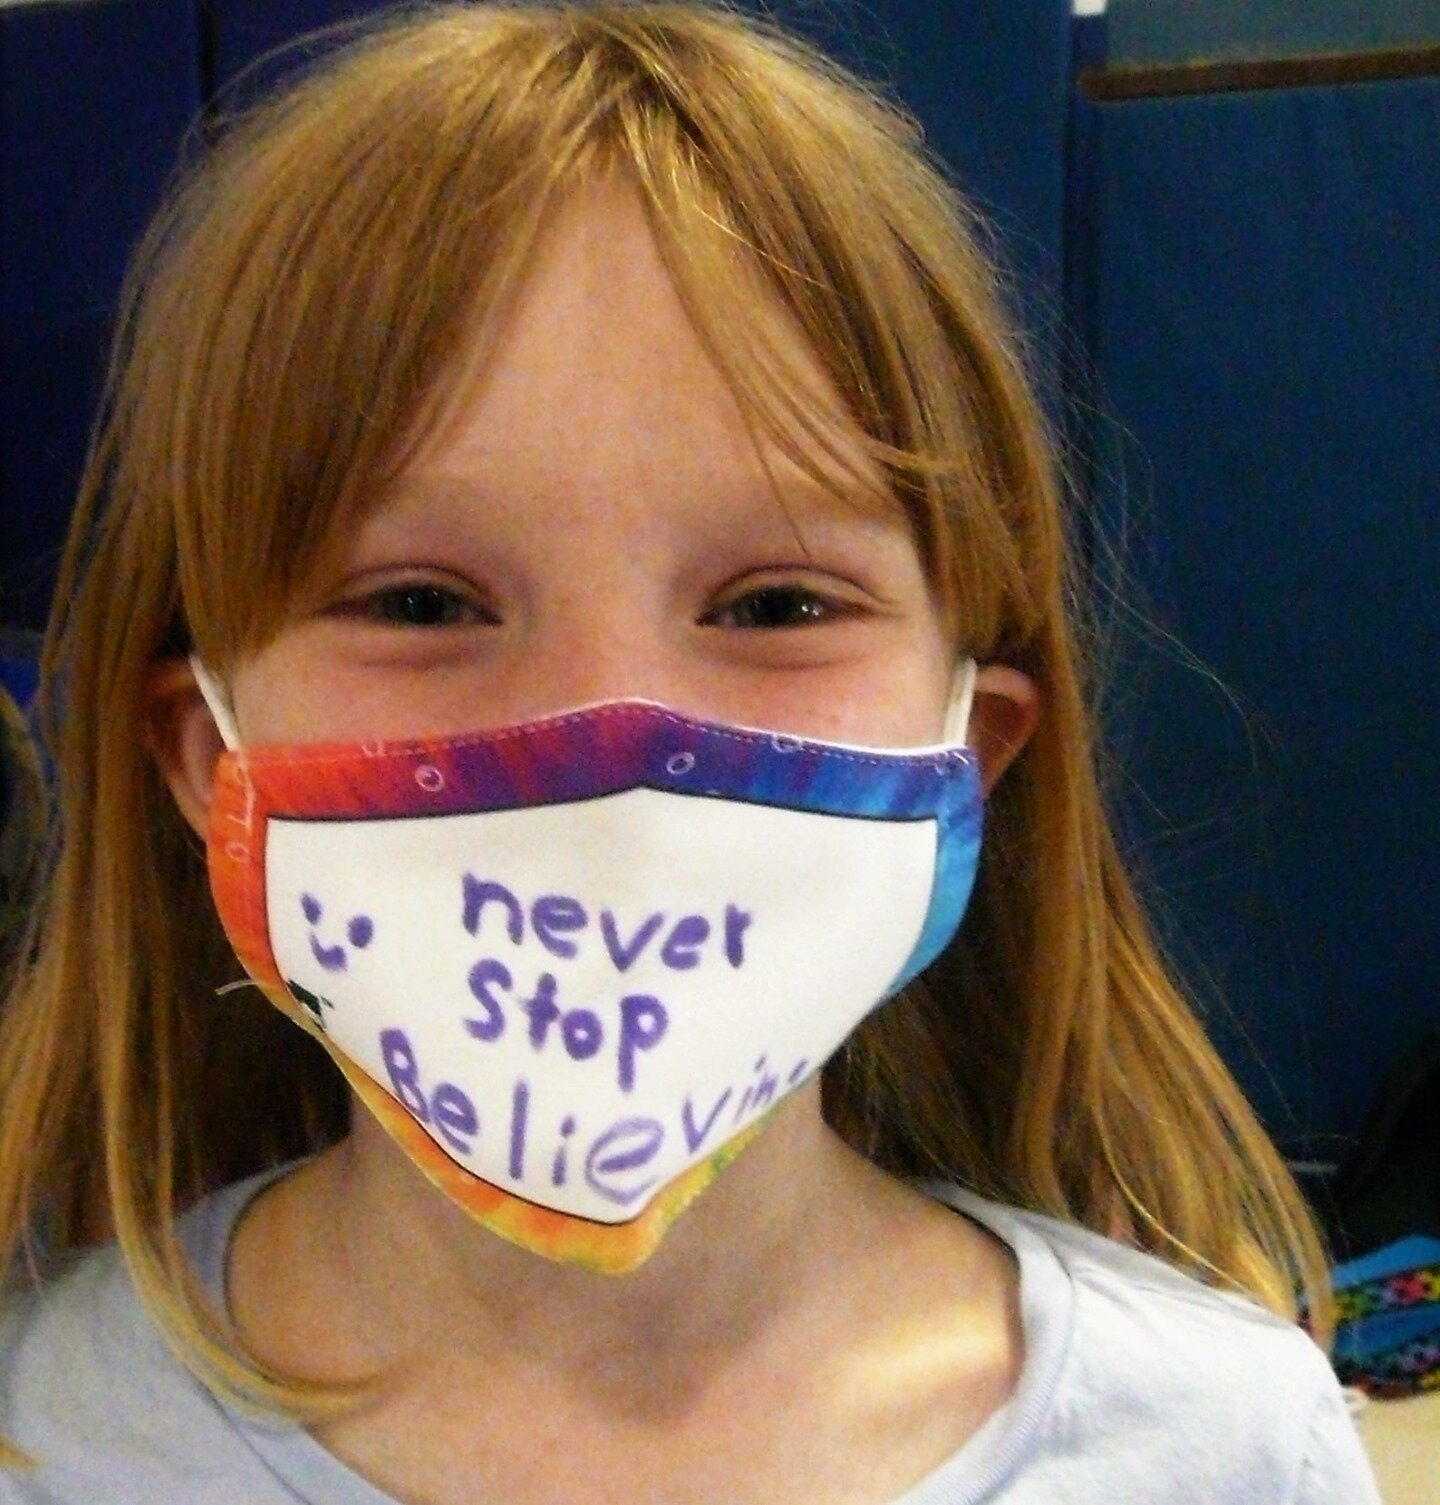 We are incredibly grateful to The Arts Bus for sharing this timely photo featuring one of our DIY masks and sending the positive message to &quot;Never Stop Believing&quot;!